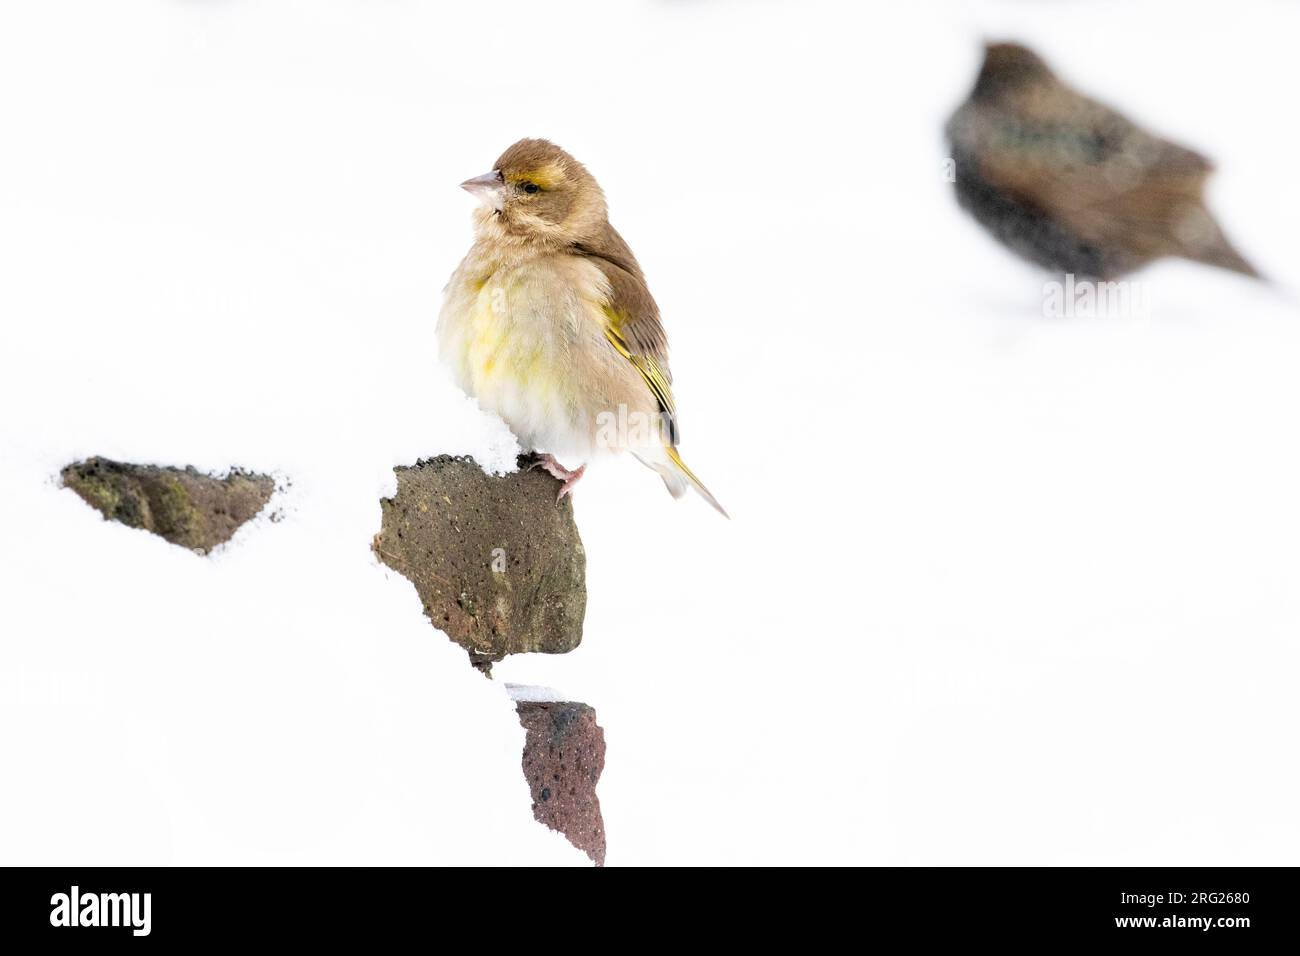 Feamle European Greenfinch (Chloris chloris) perched in the snow in an urabn backyard in the Netherlands. Stock Photo